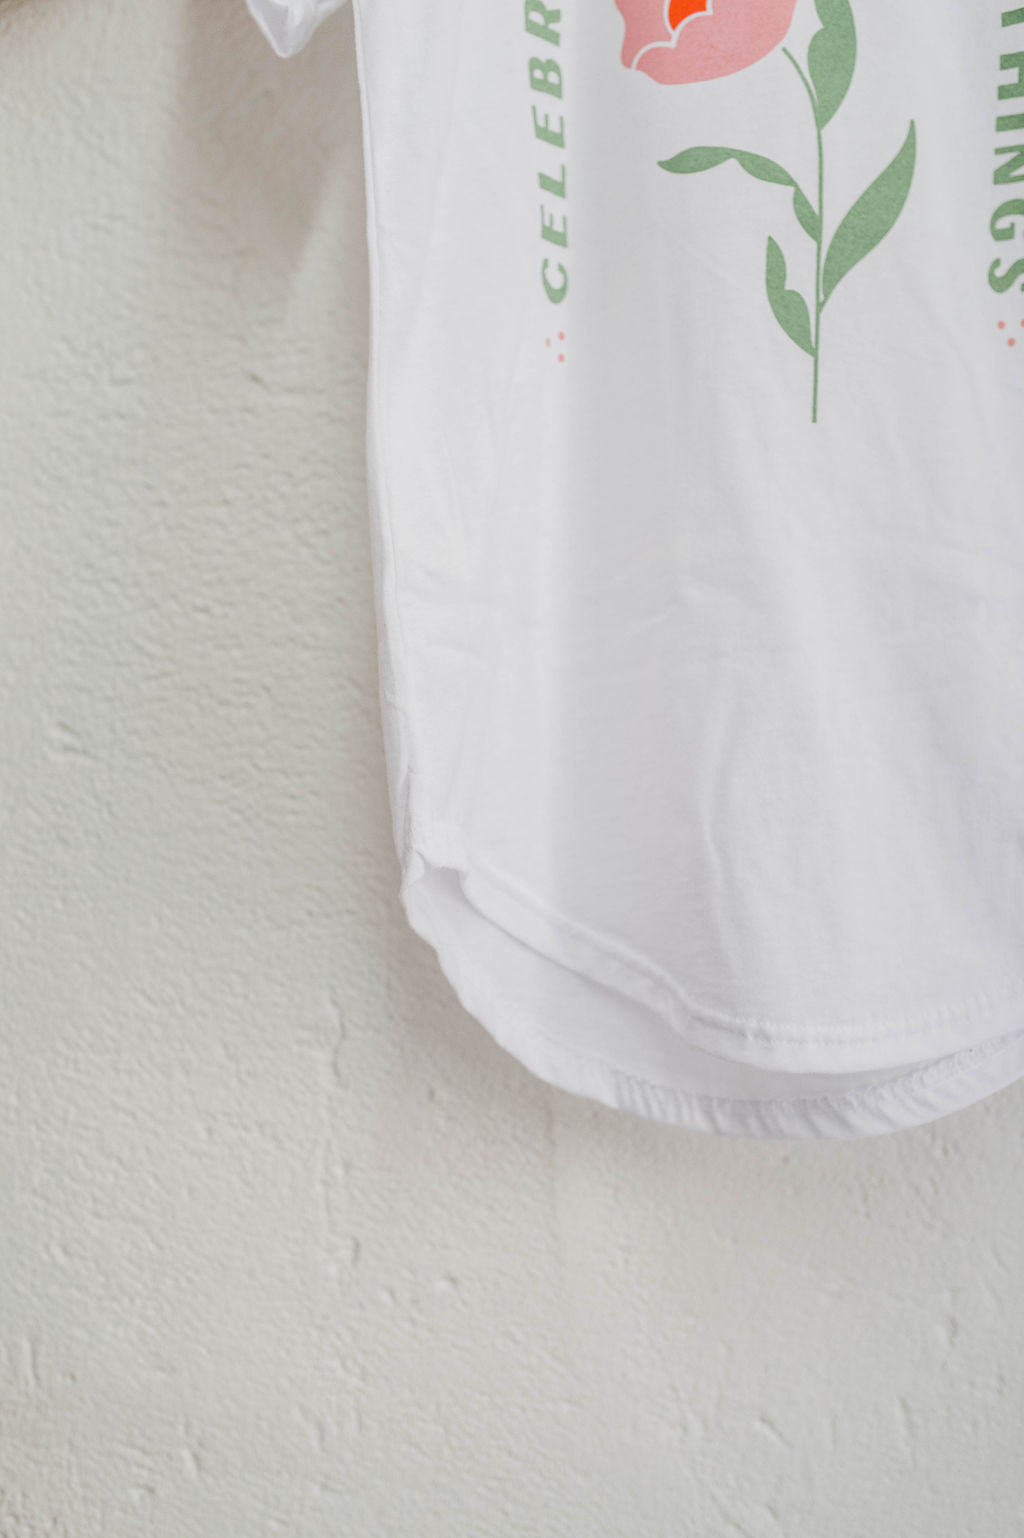 celebrate the little things | white curved hem tee